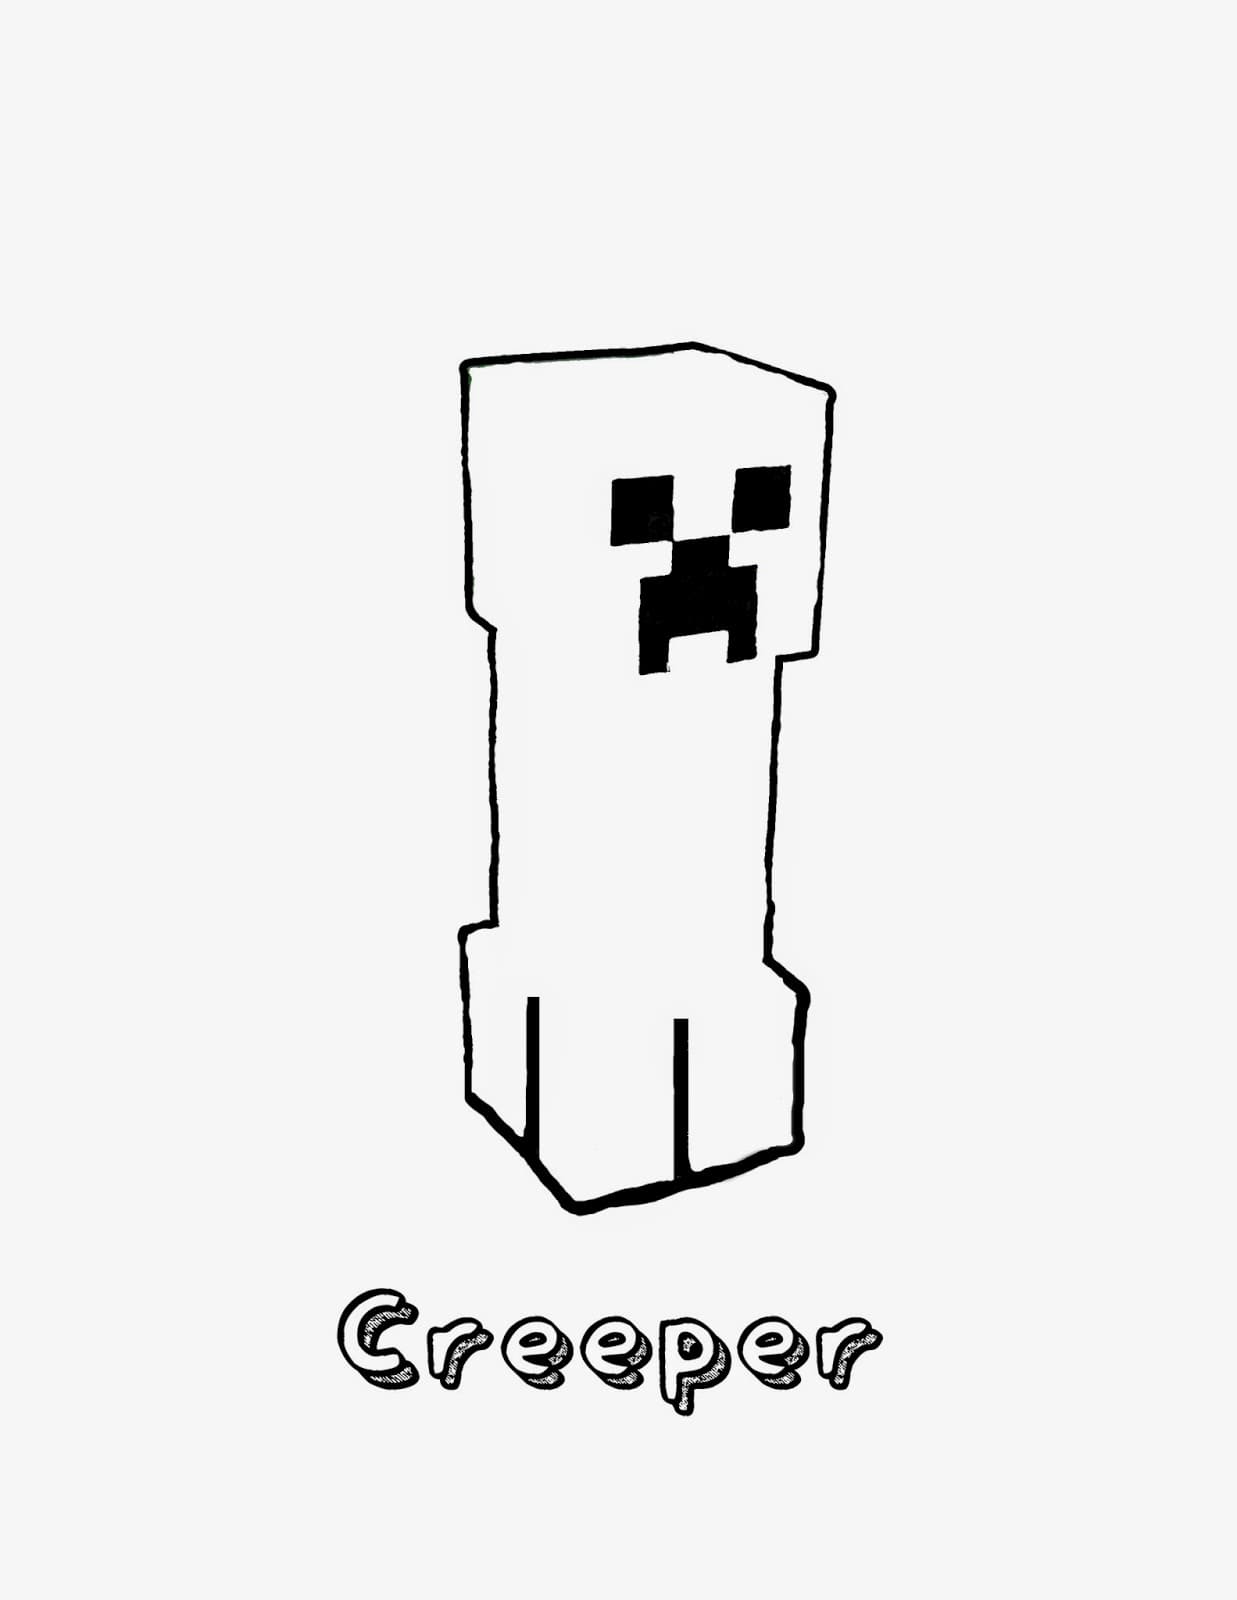 Minecraft Creeper Image For Kids Coloring Page